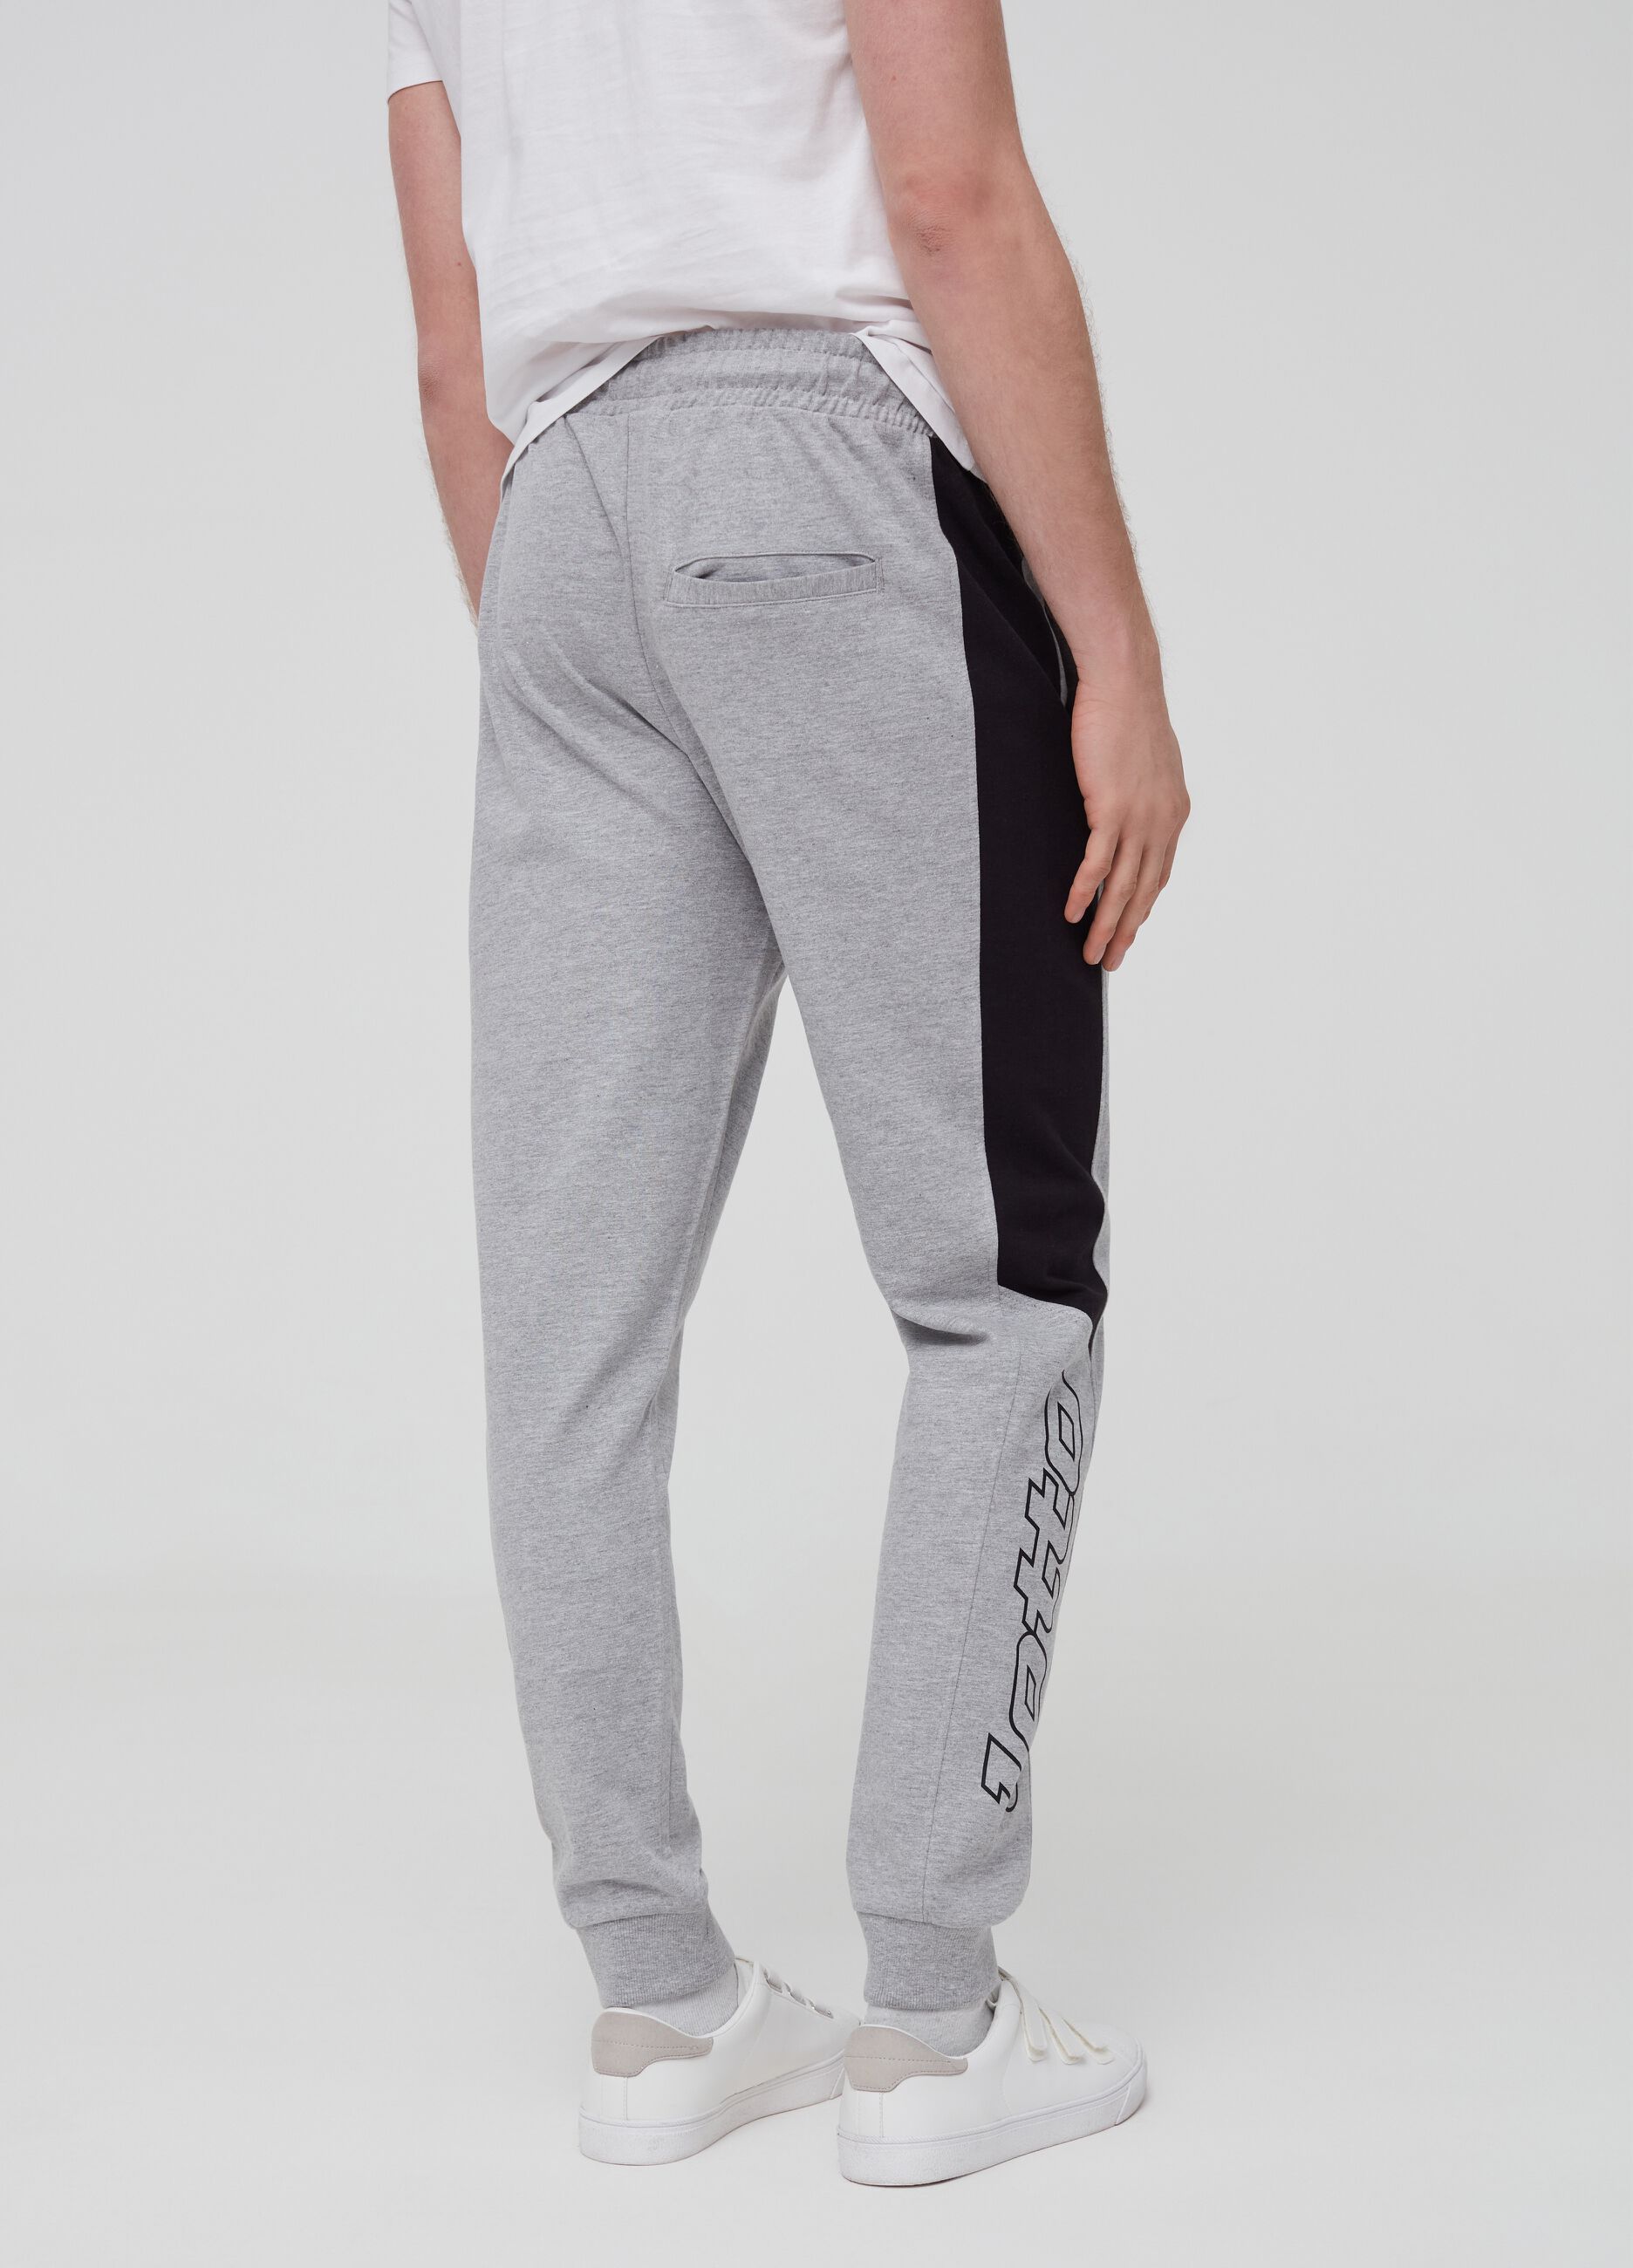 Mélange joggers with Lotto print